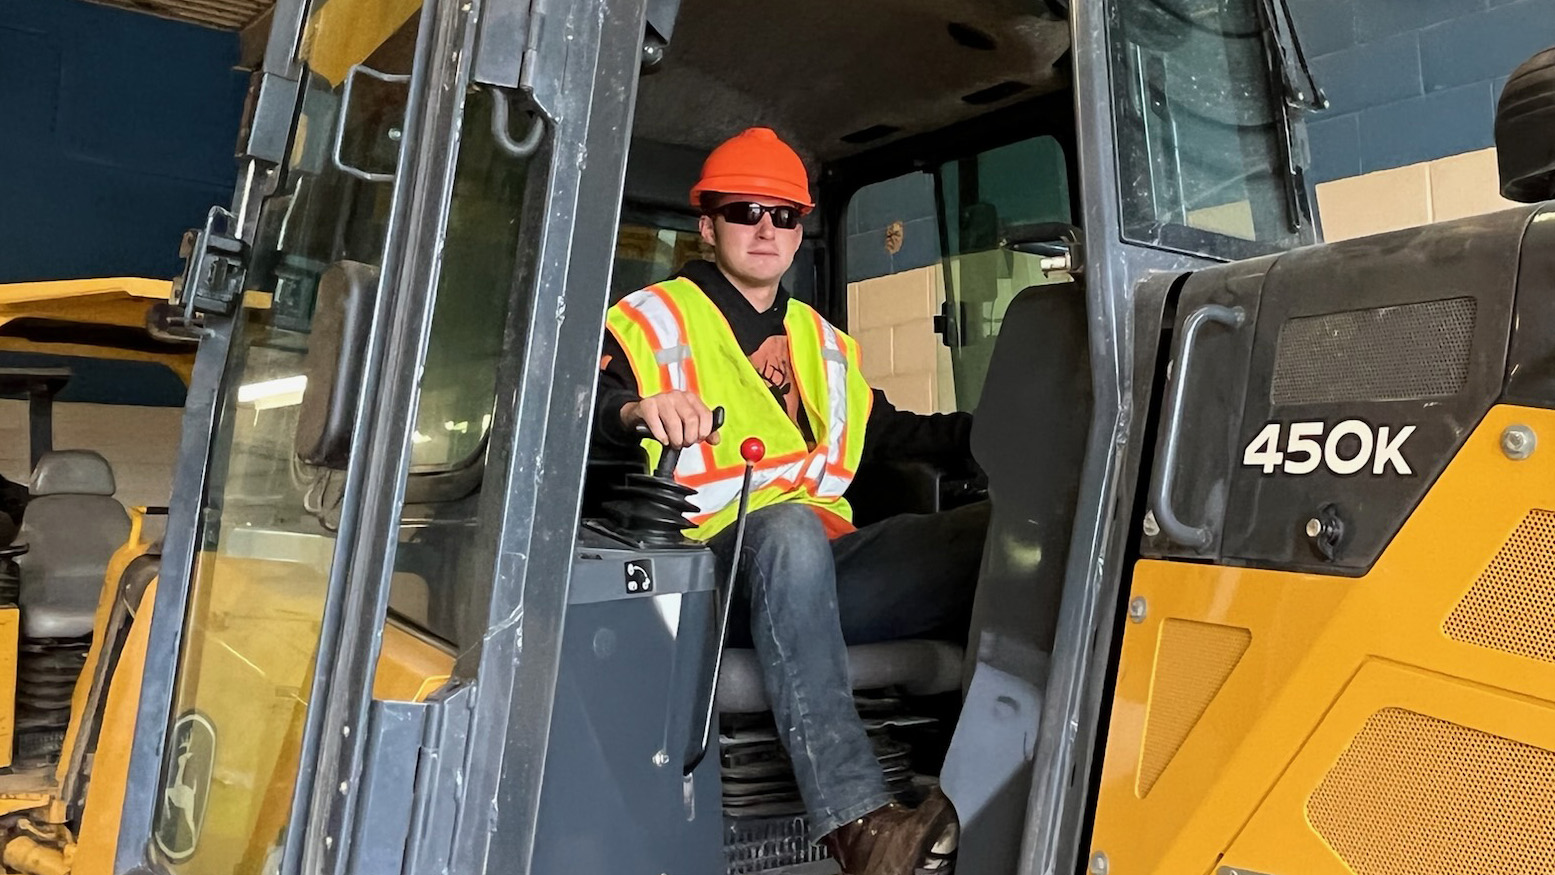 Career and Technical Education Student Alex Stapf, who is wearing a flourescent orange hard hat, black sunglasses, a yellow safety vest and jeans, sits in a large, yellow, construction vehicle in the garage of a Capital Region BOCES construction and heavy equipment classroom. Stapf is turned forward and looks at the camera.